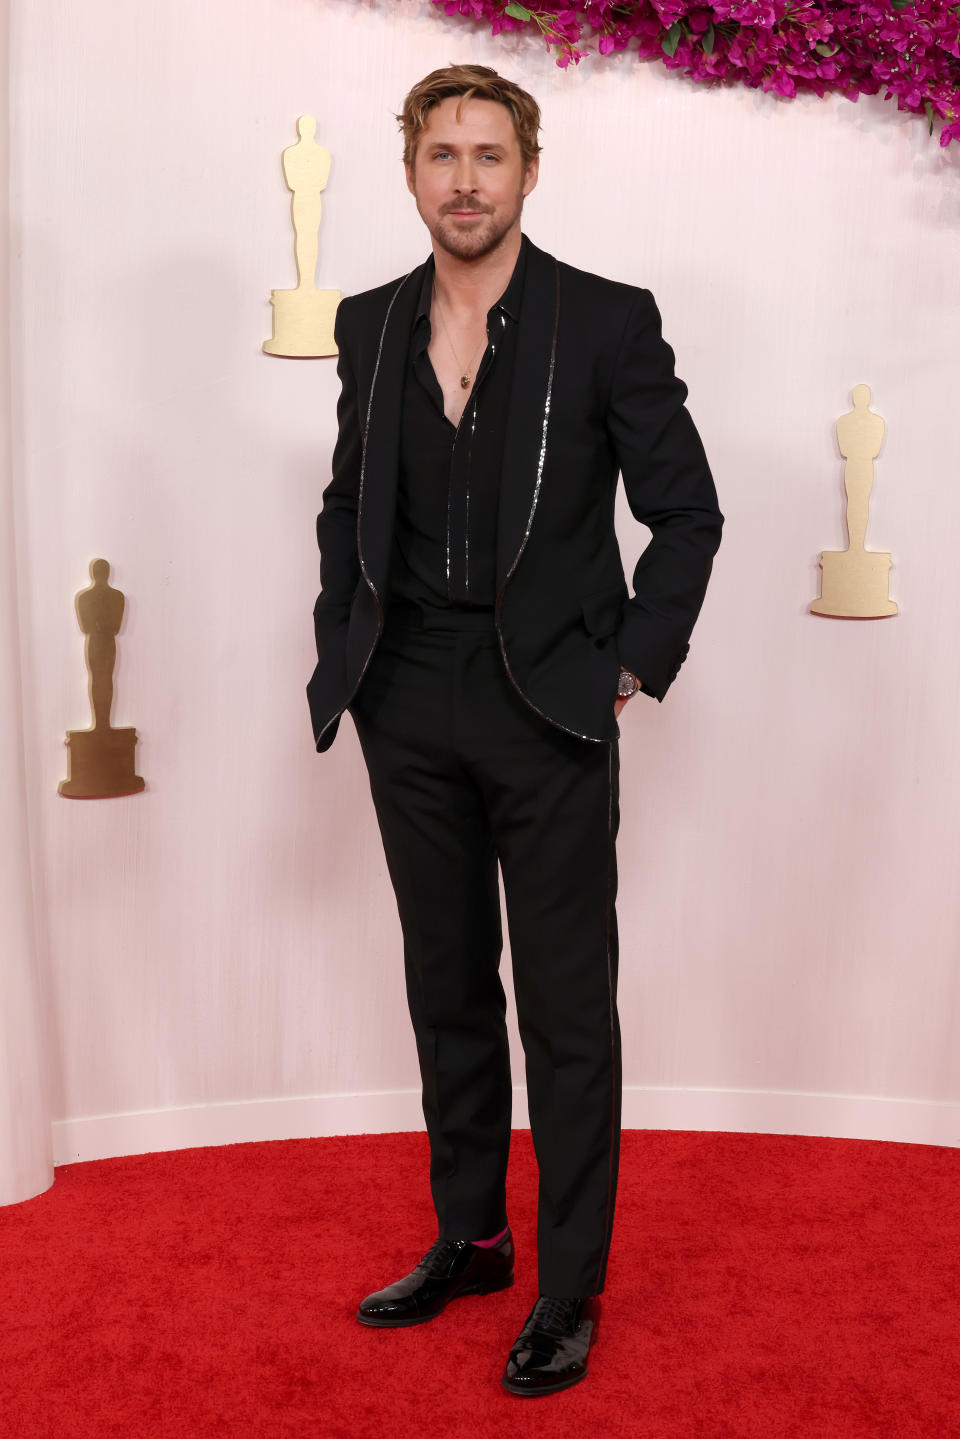 HOLLYWOOD, CALIFORNIA - MARCH 10: Ryan Gosling attends the 96th Annual Academy Awards on March 10, 2024 in Hollywood, California. (Photo by John Shearer/WireImage)